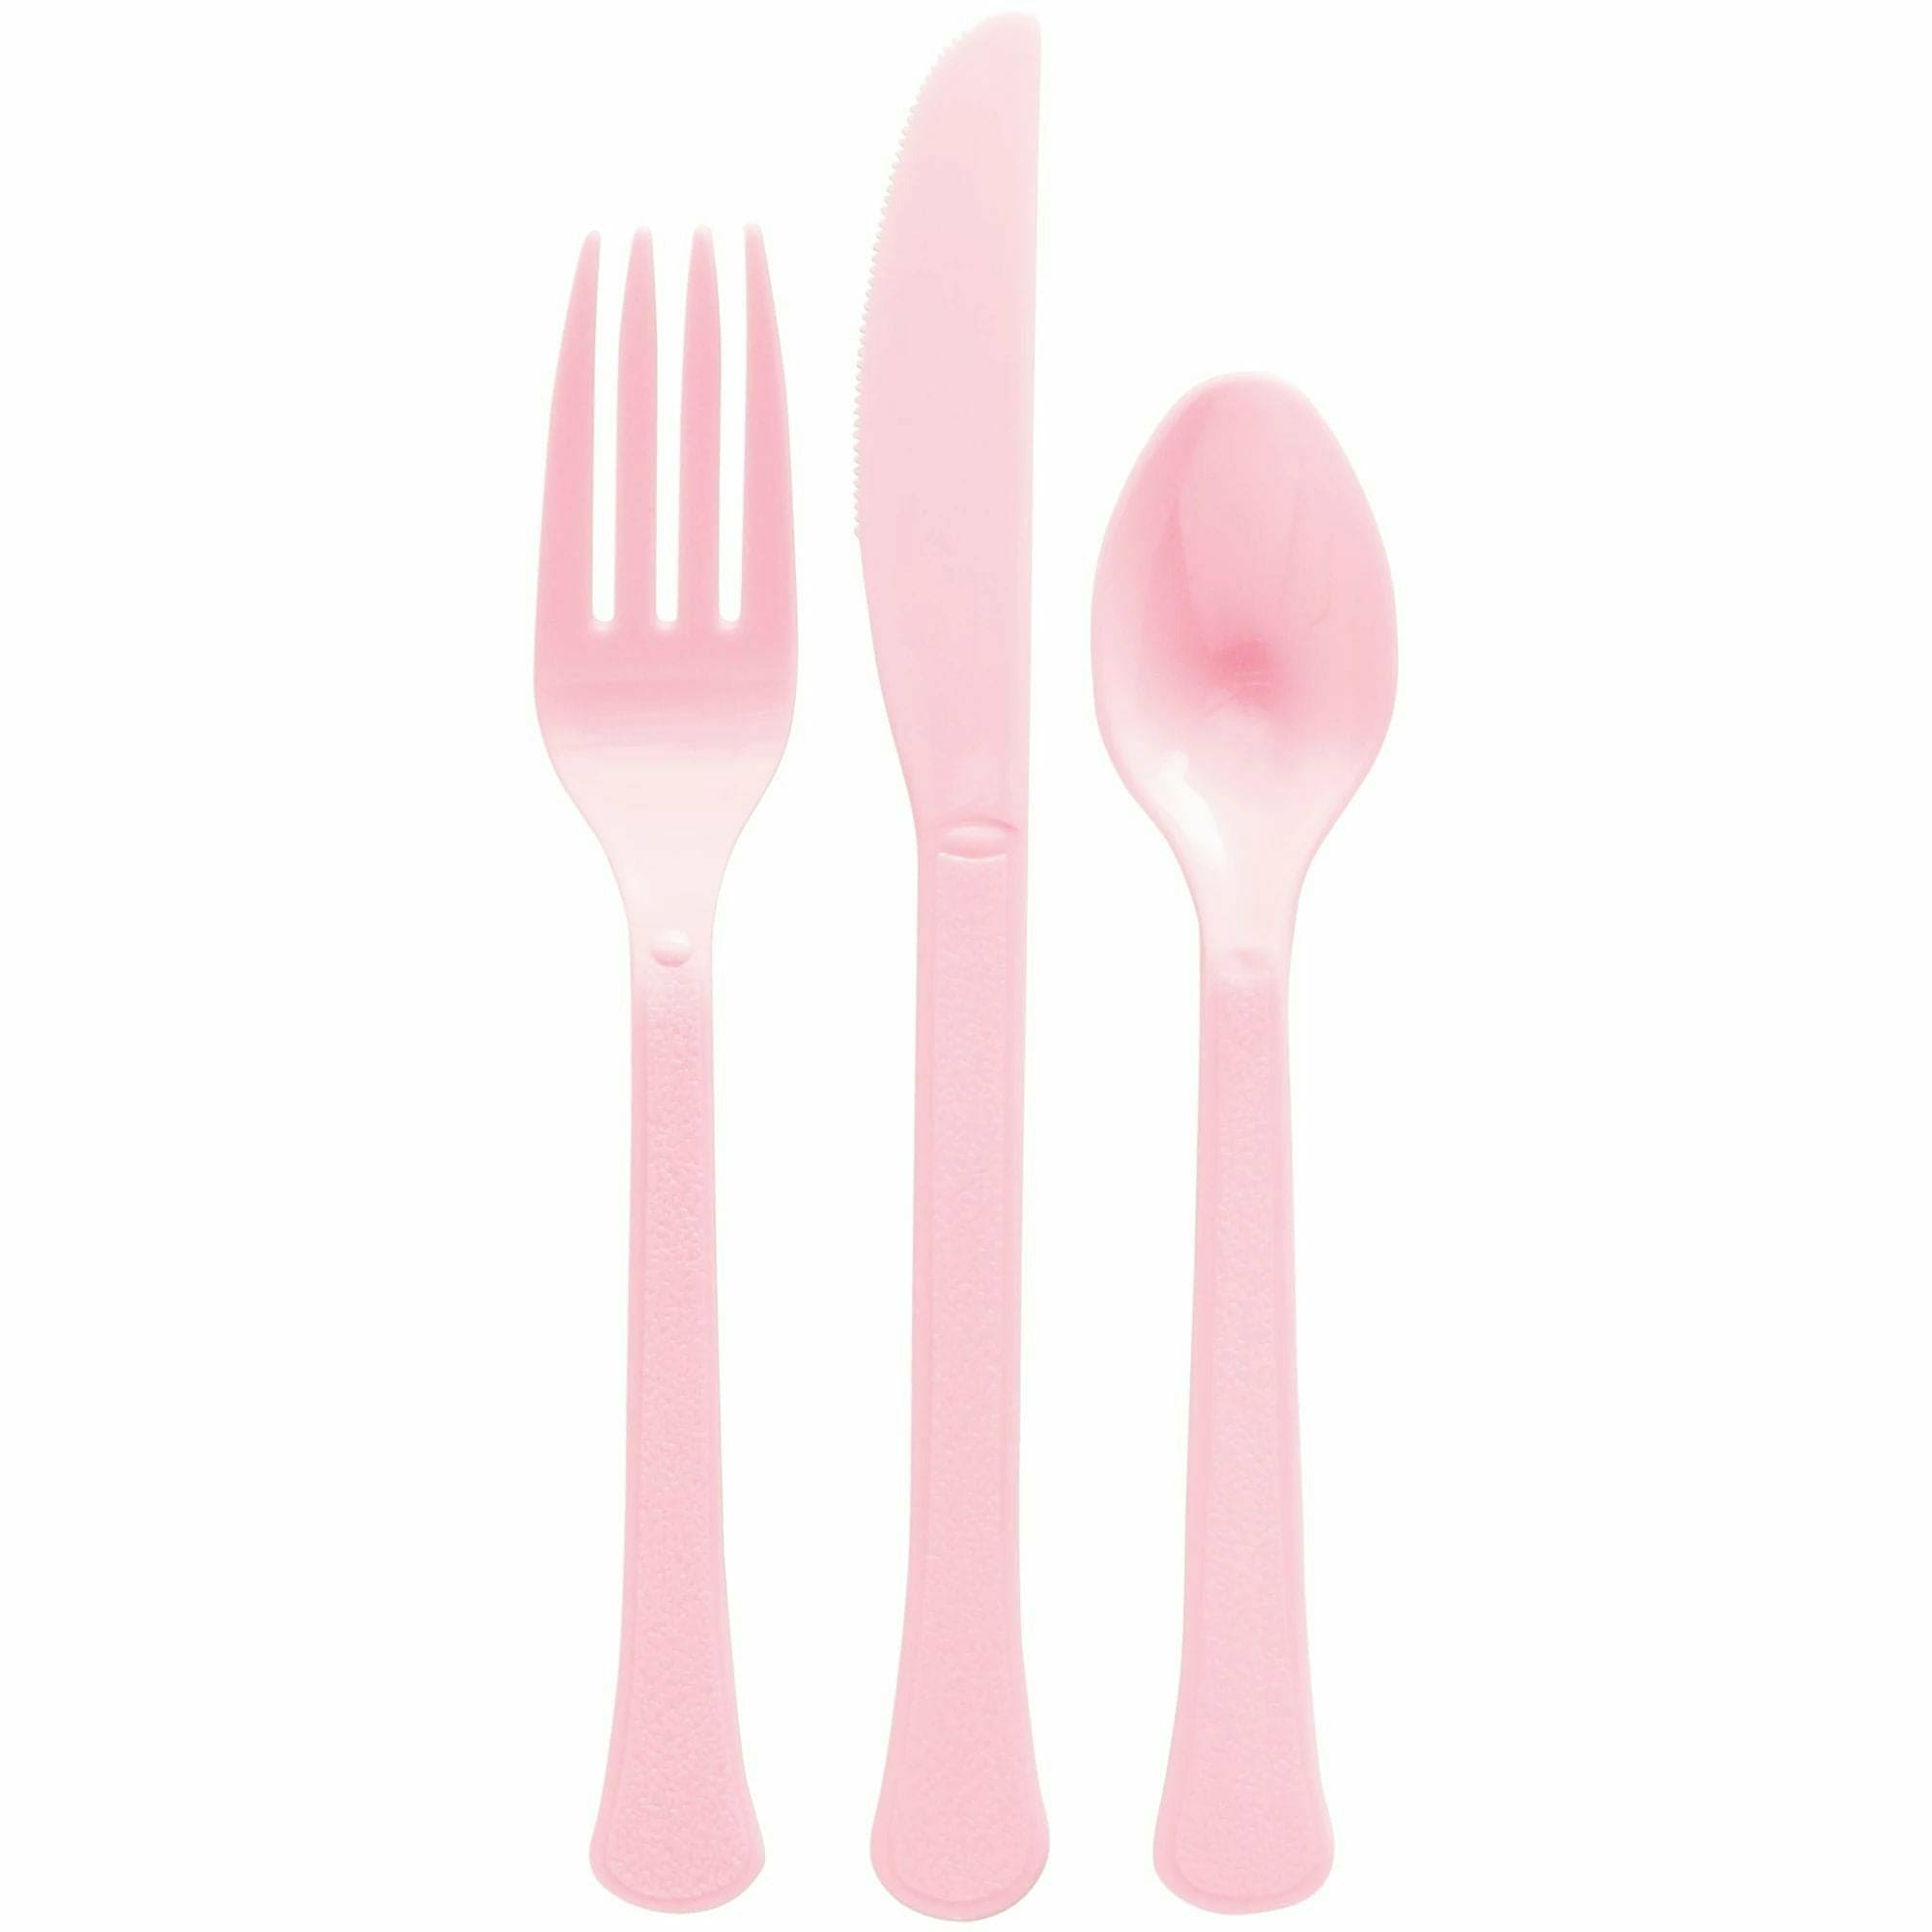 Amscan BASIC New Pink - Boxed, Heavy Weight Cutlery